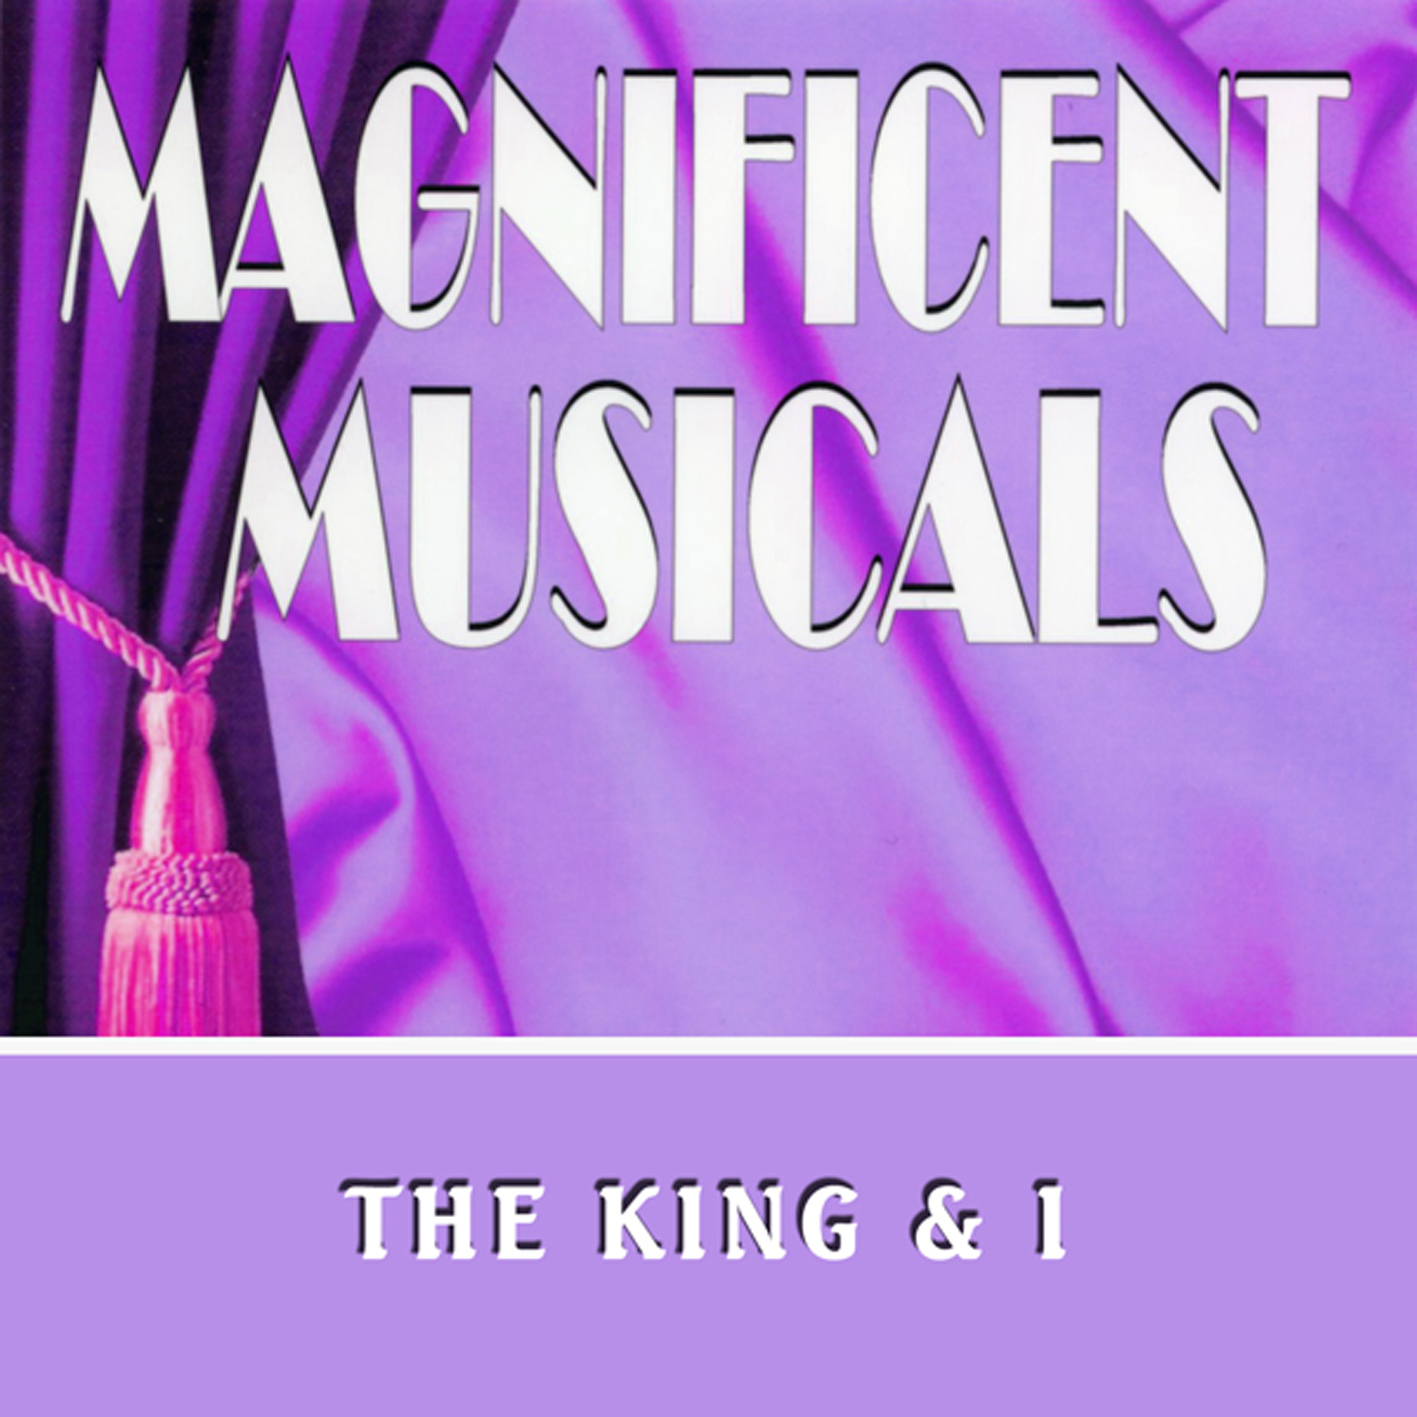 The Magnificent Musicals: The King And I